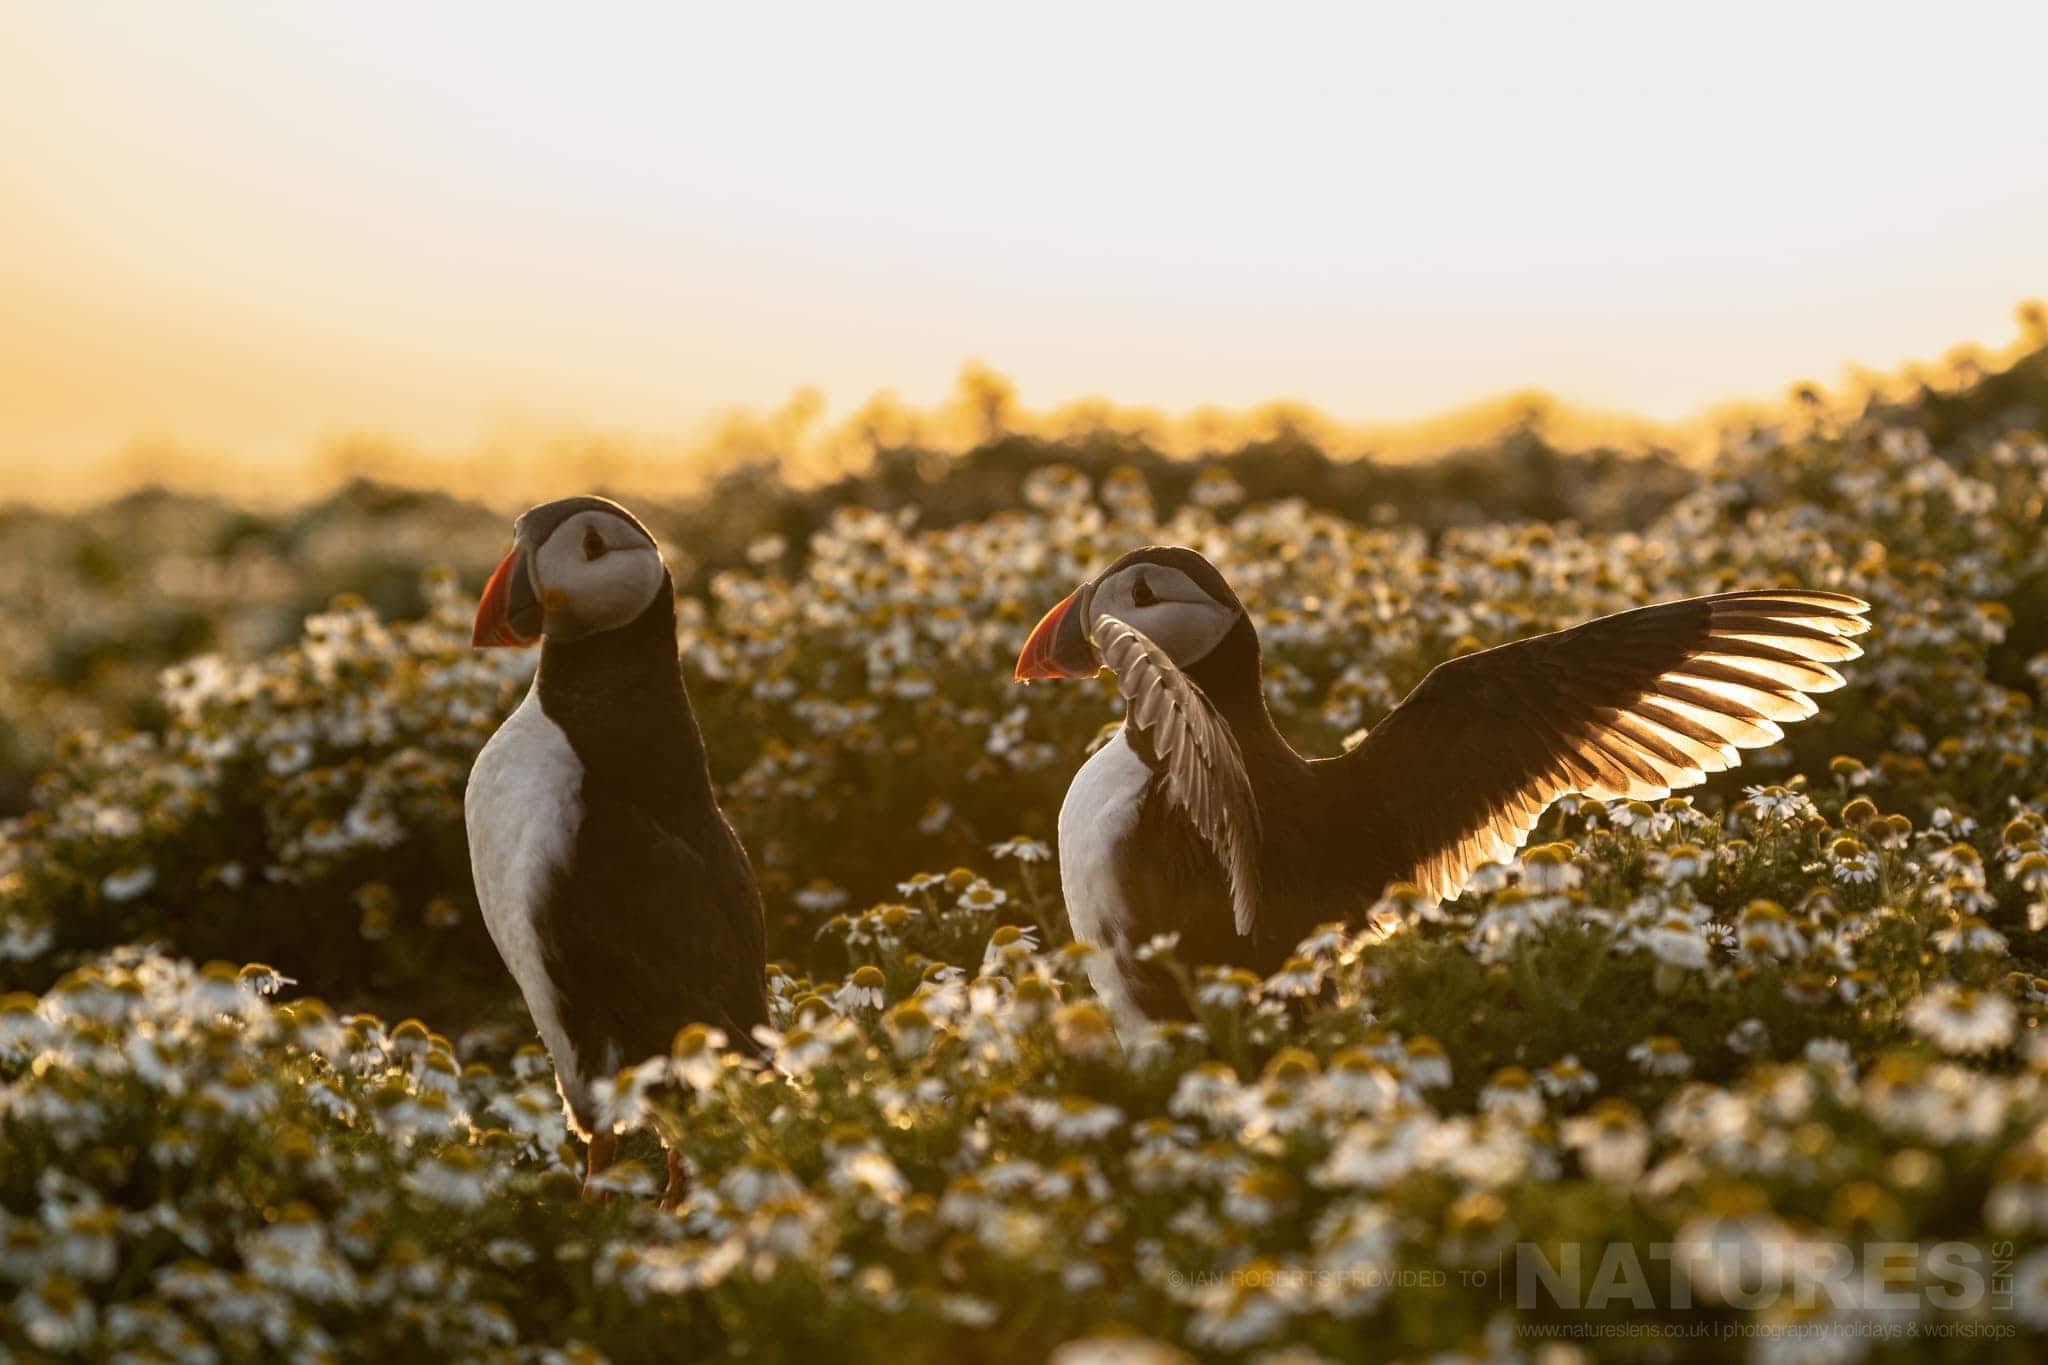 A Pair Of Puffins Bathed In Soft Light This Image Was Captured By Ian Roberts During The Natureslens Welsh Puffins Of Skomer Island Photography Holiday